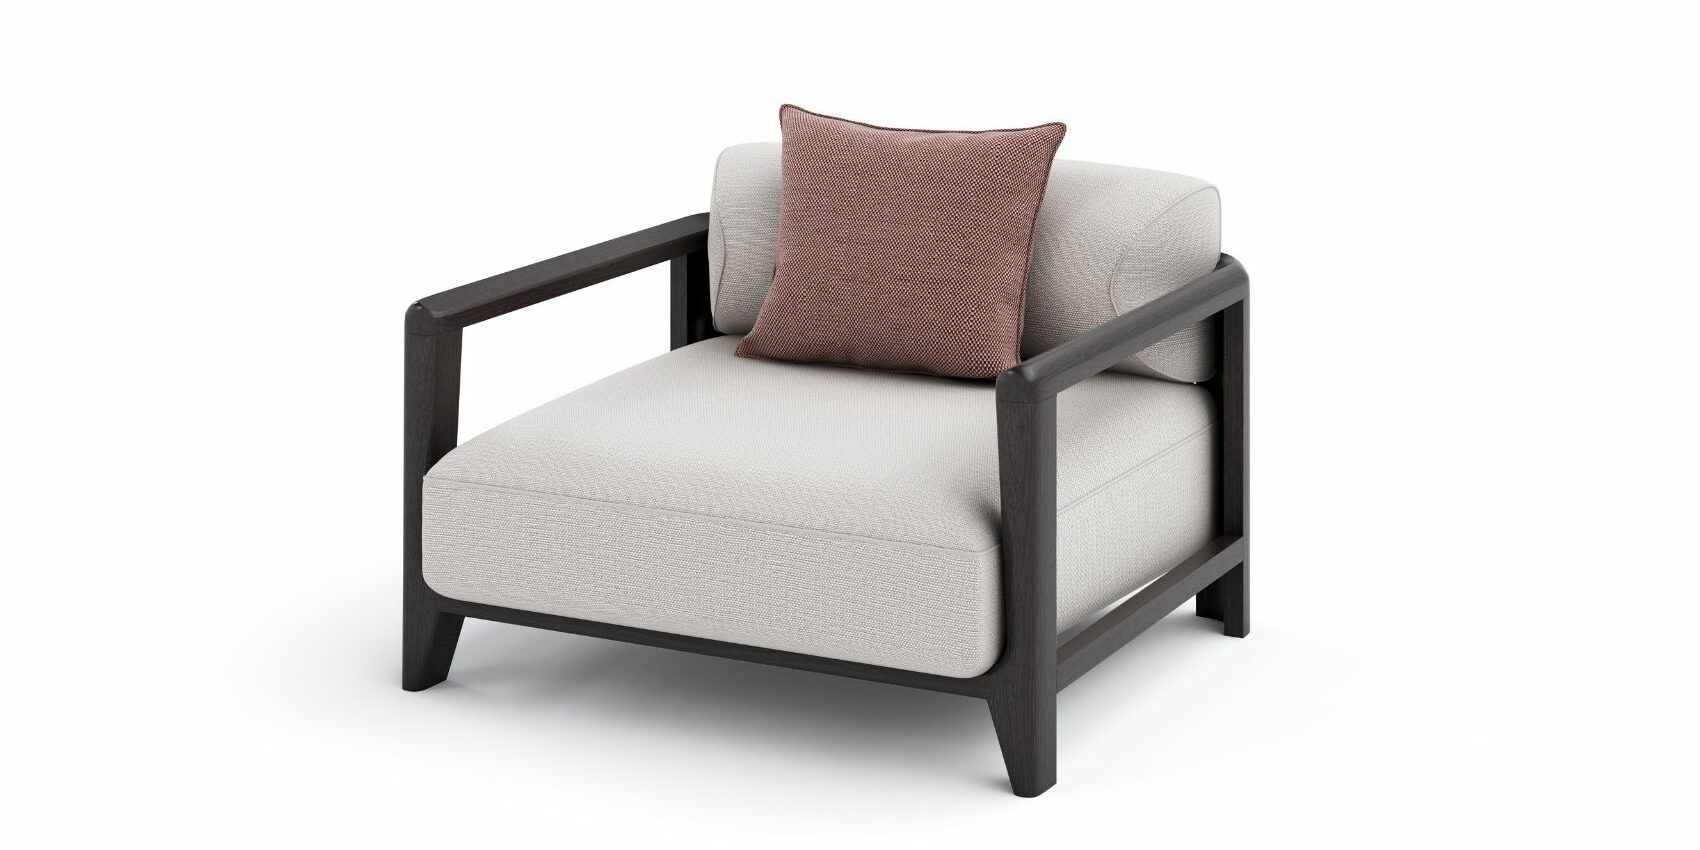 Folie Rosemount Chair in Outdoor Chairs for Folie collection